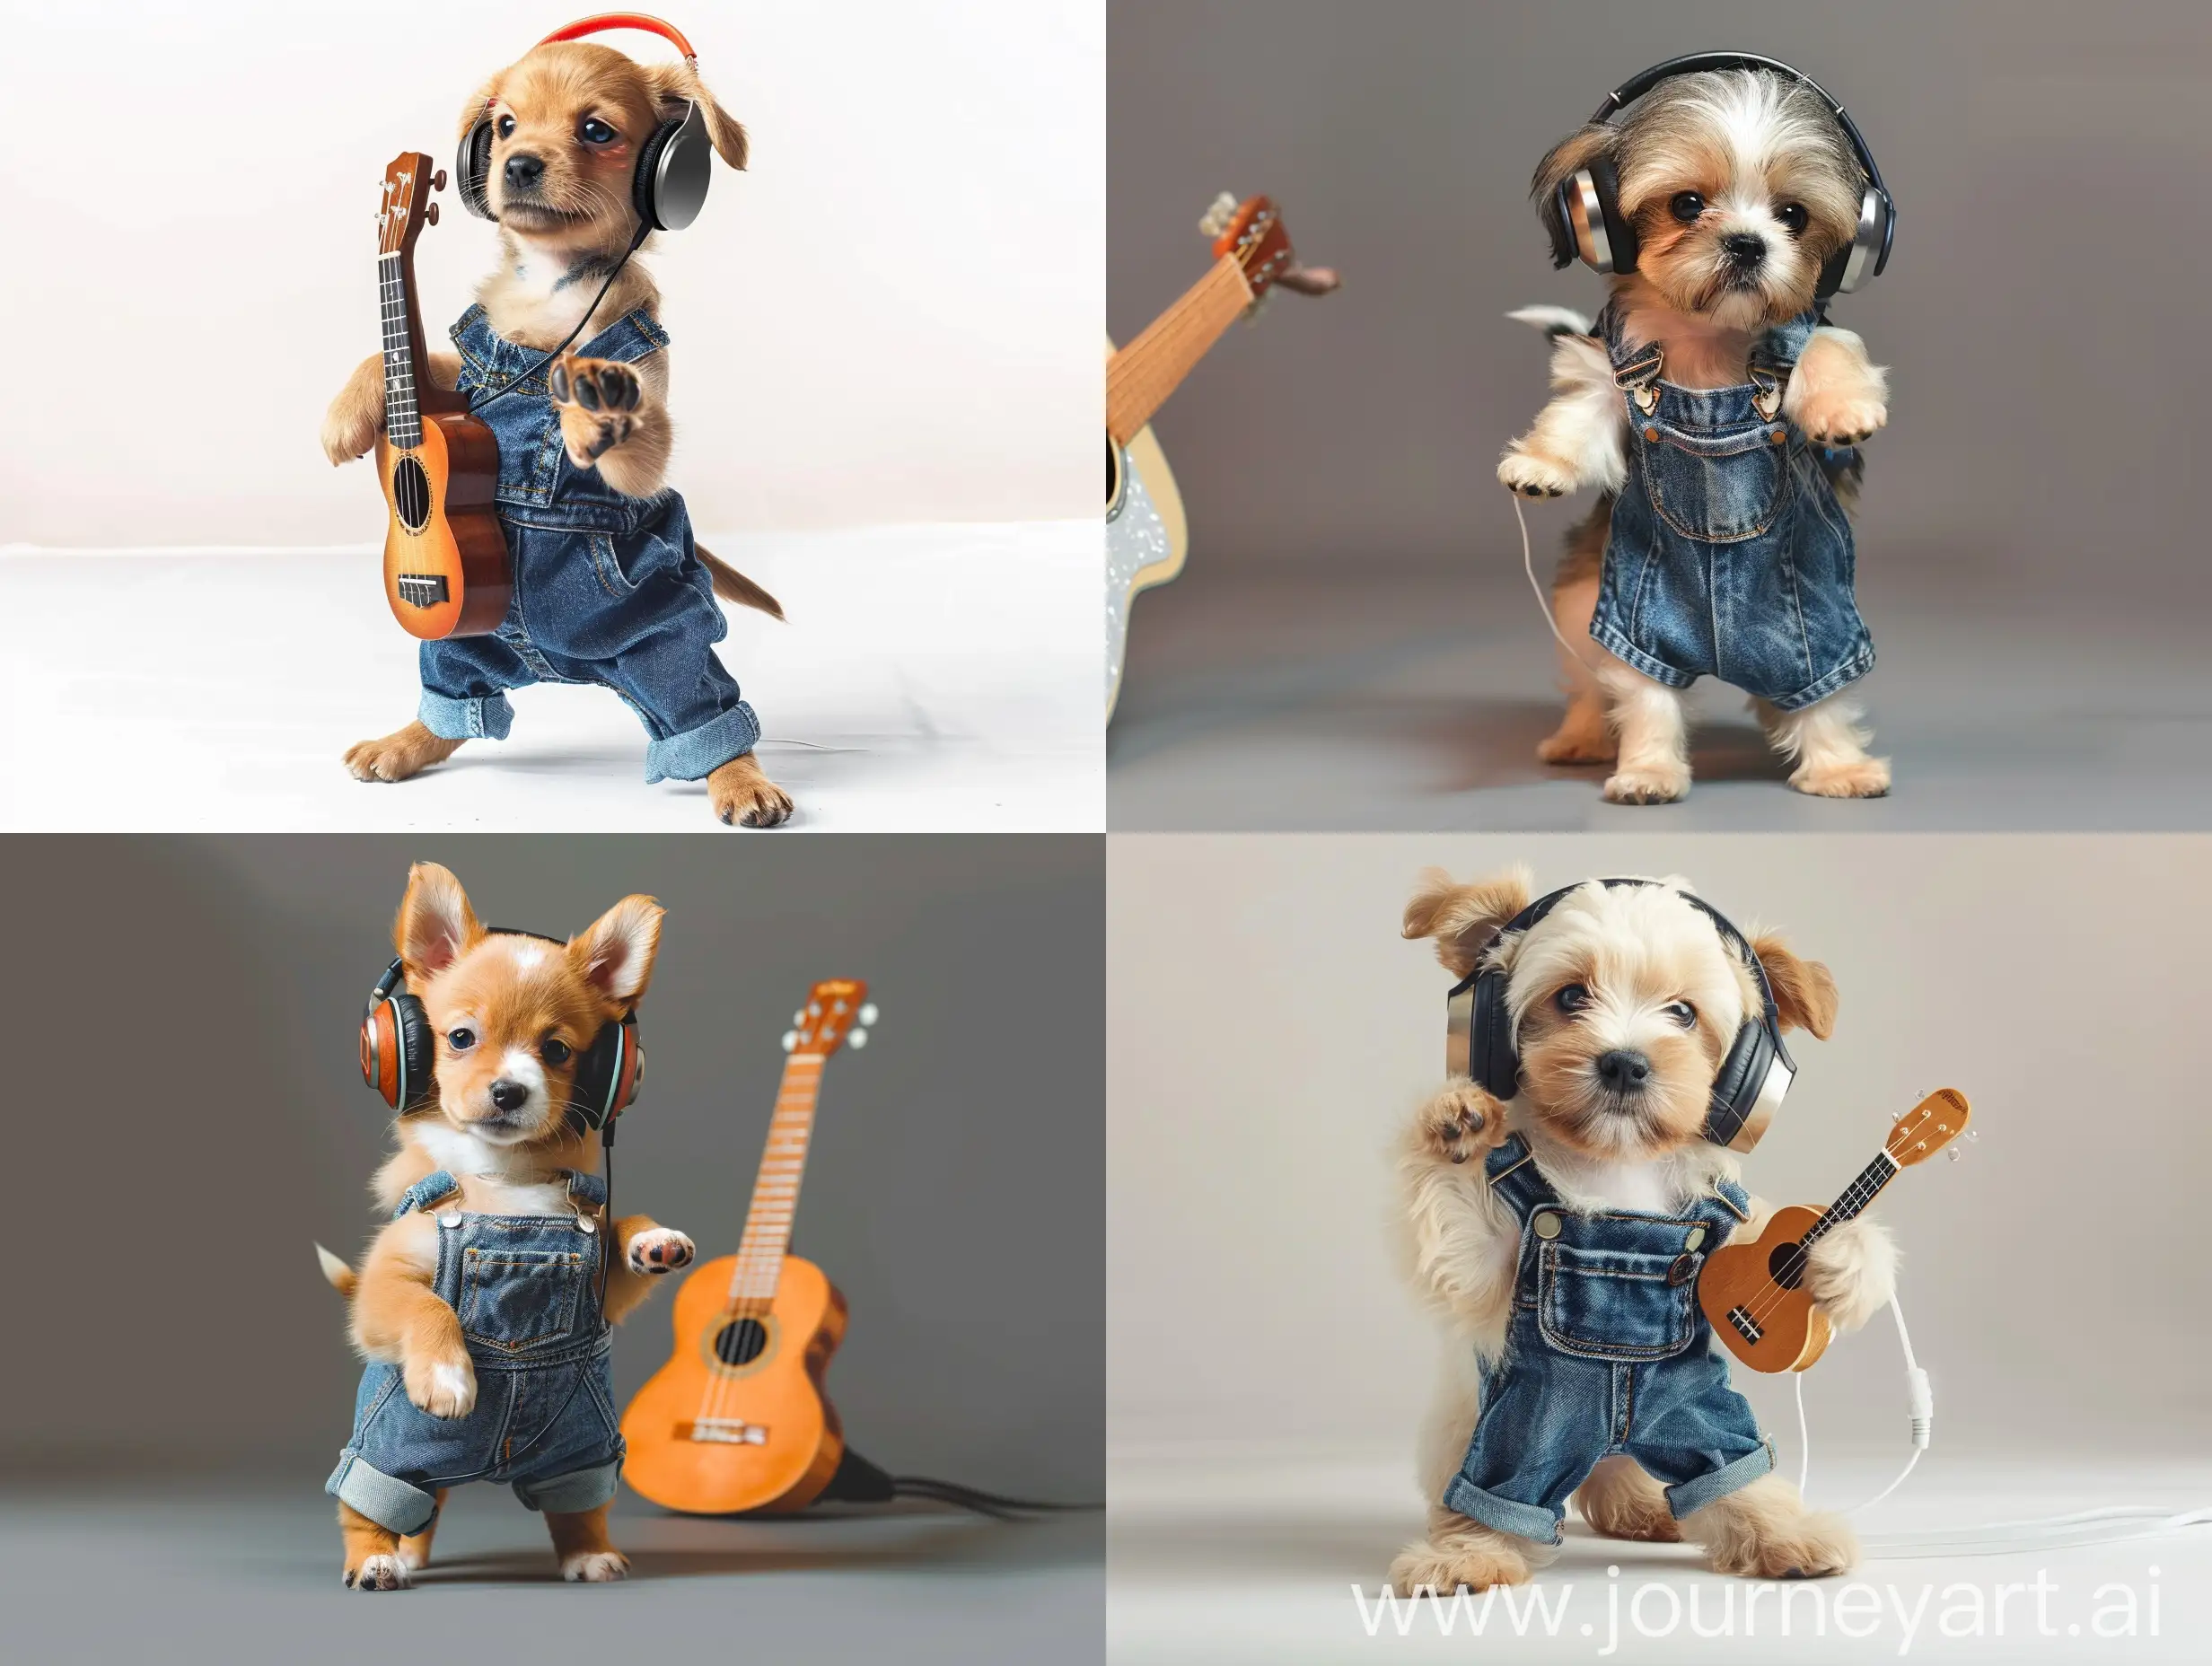 Adorable-Puppy-Musician-DenimClad-Pup-Playing-Guitar-and-Listening-to-Tunes